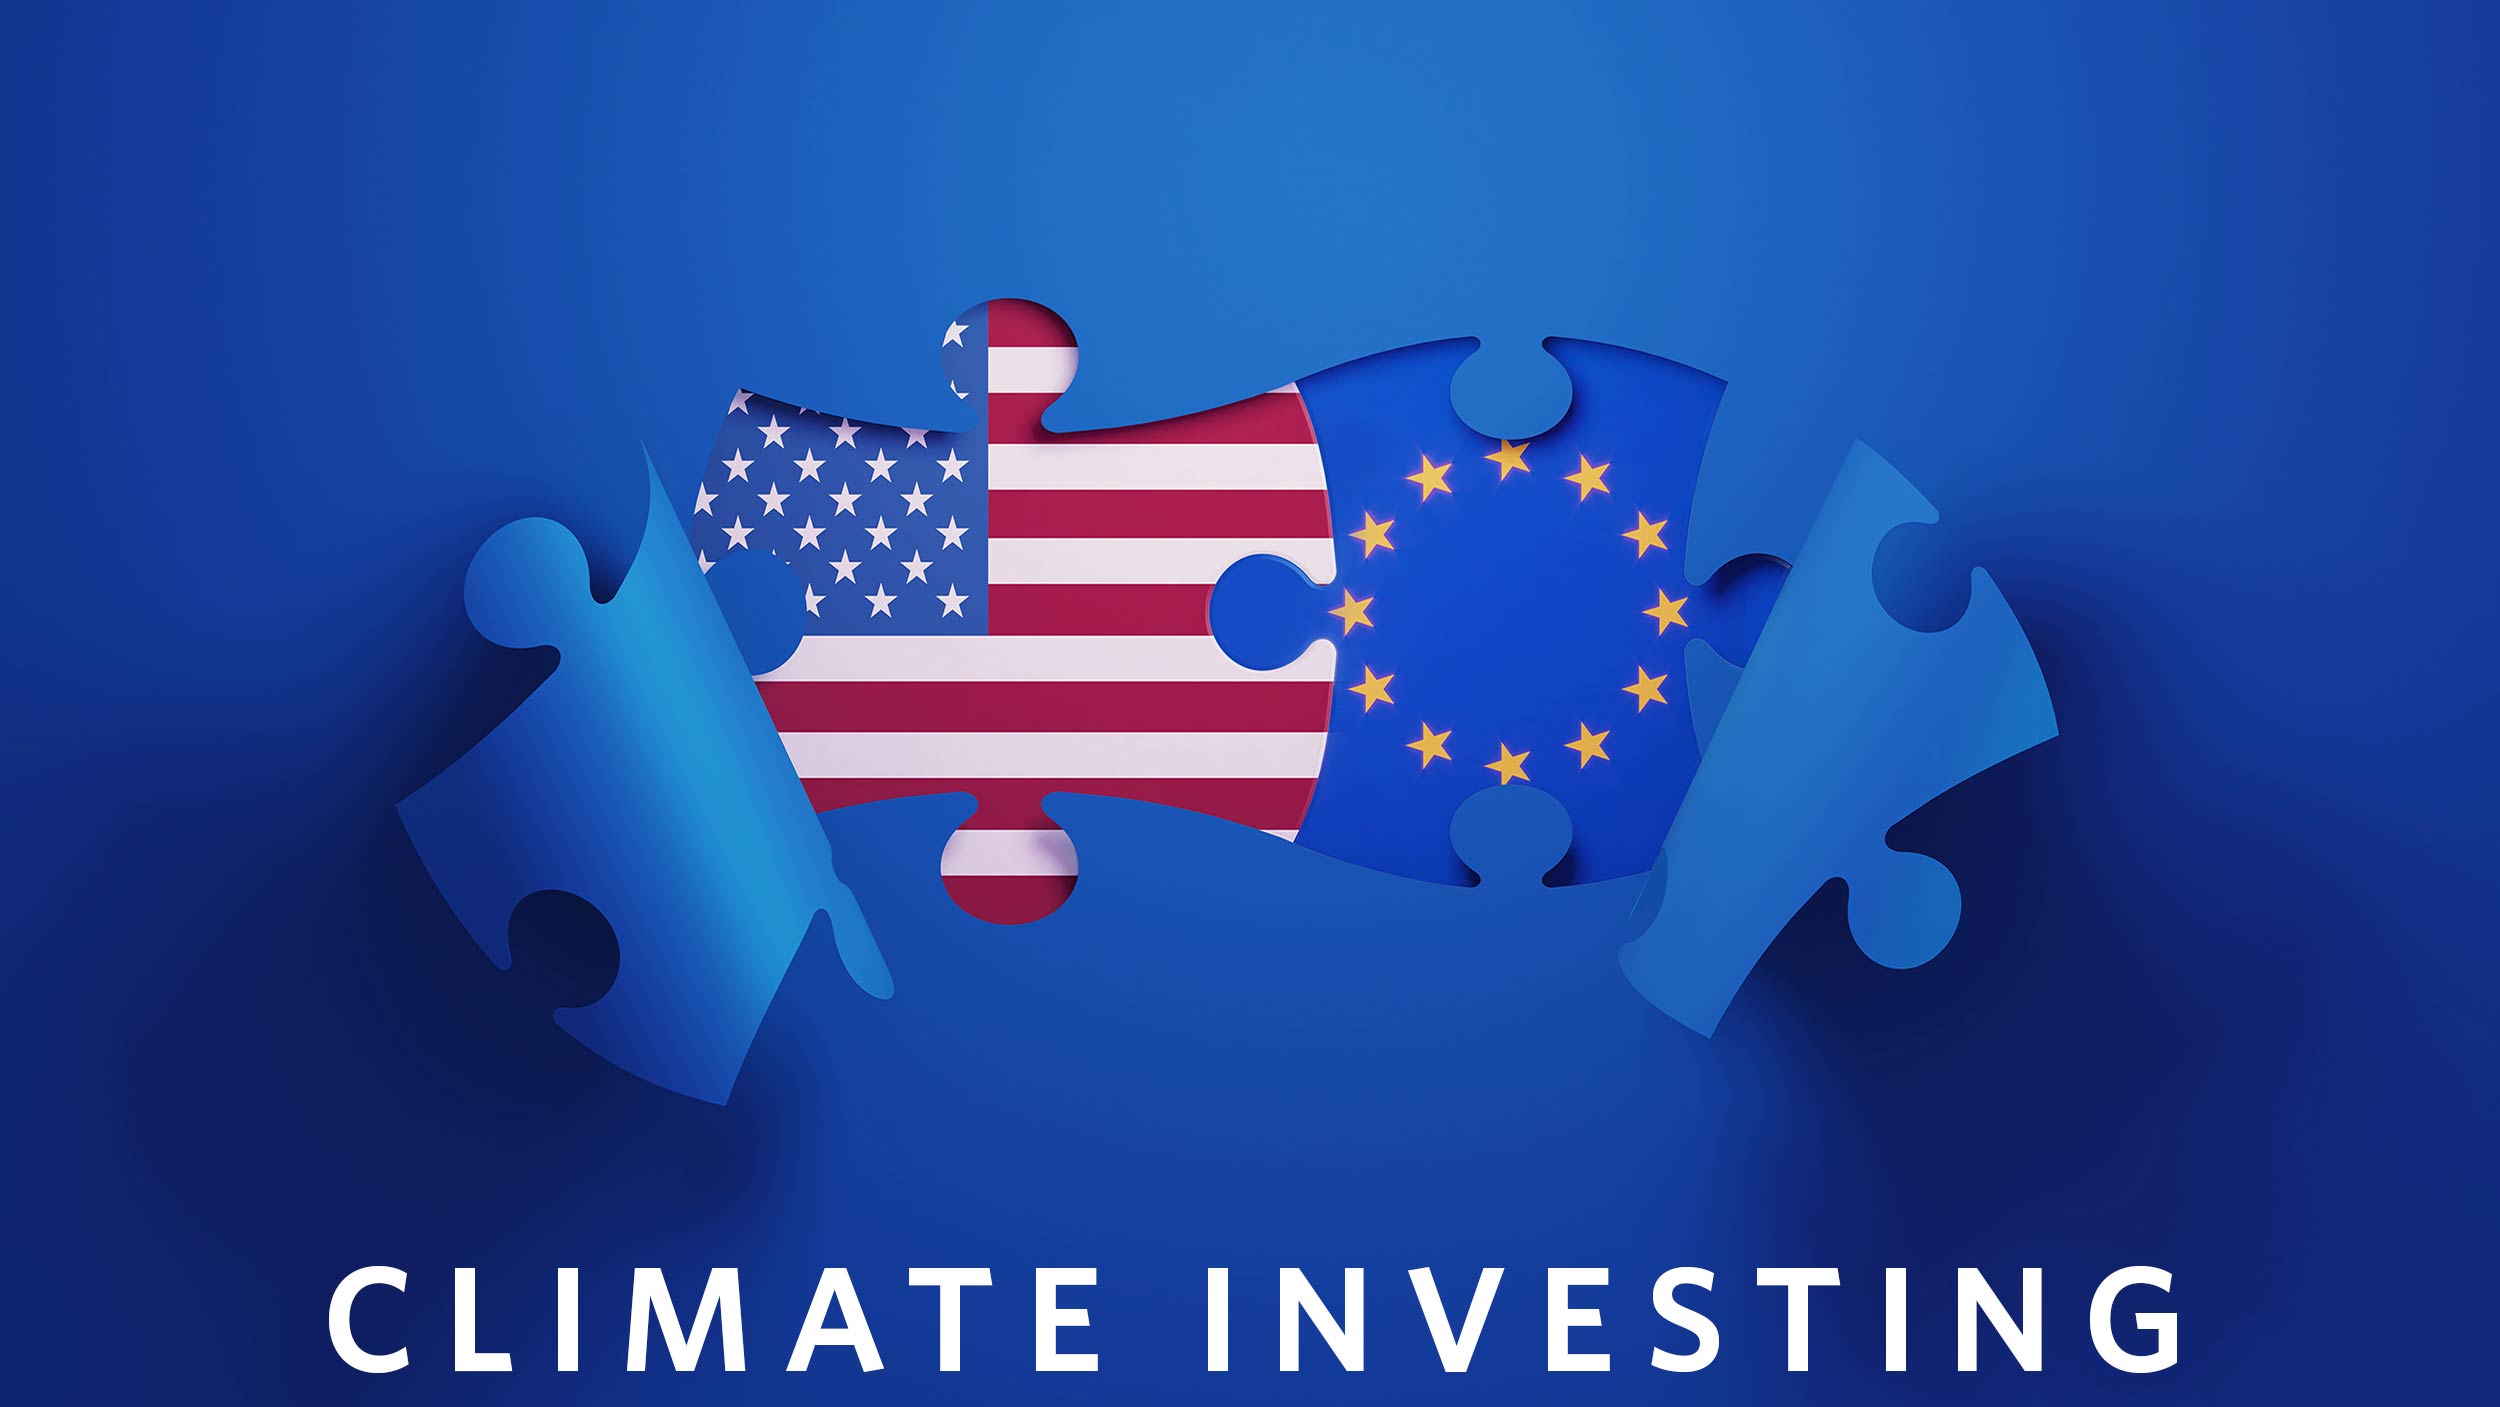 The Time Is Now: Climate Transition Investing for US Investors